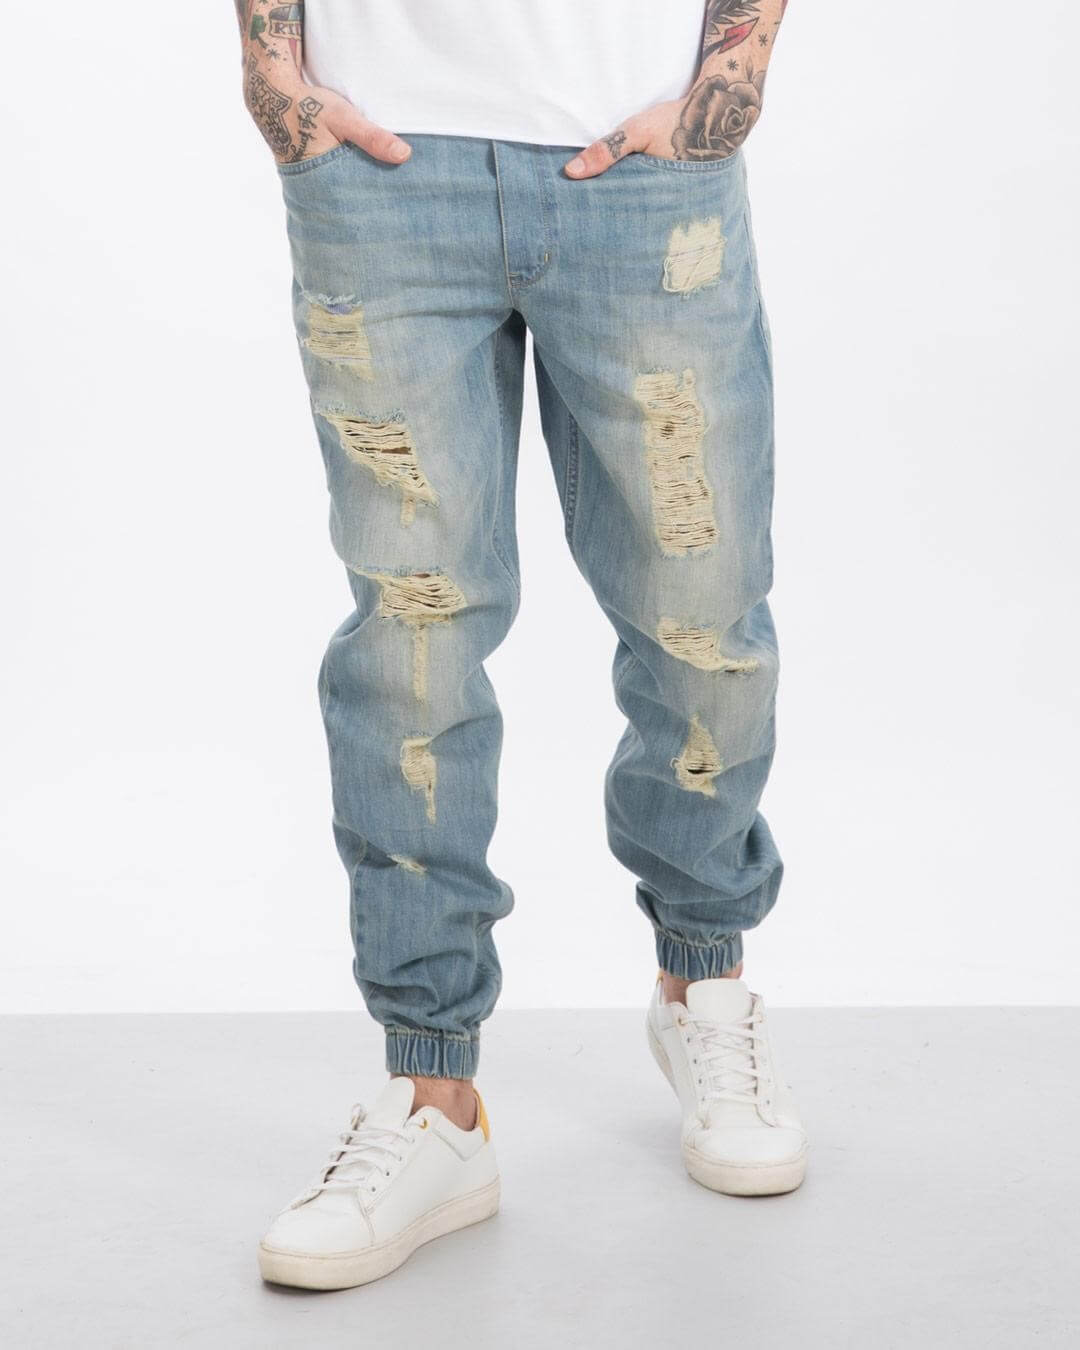 Jeans Types that are Trending | What jeans are trending? - BlogsAndNews